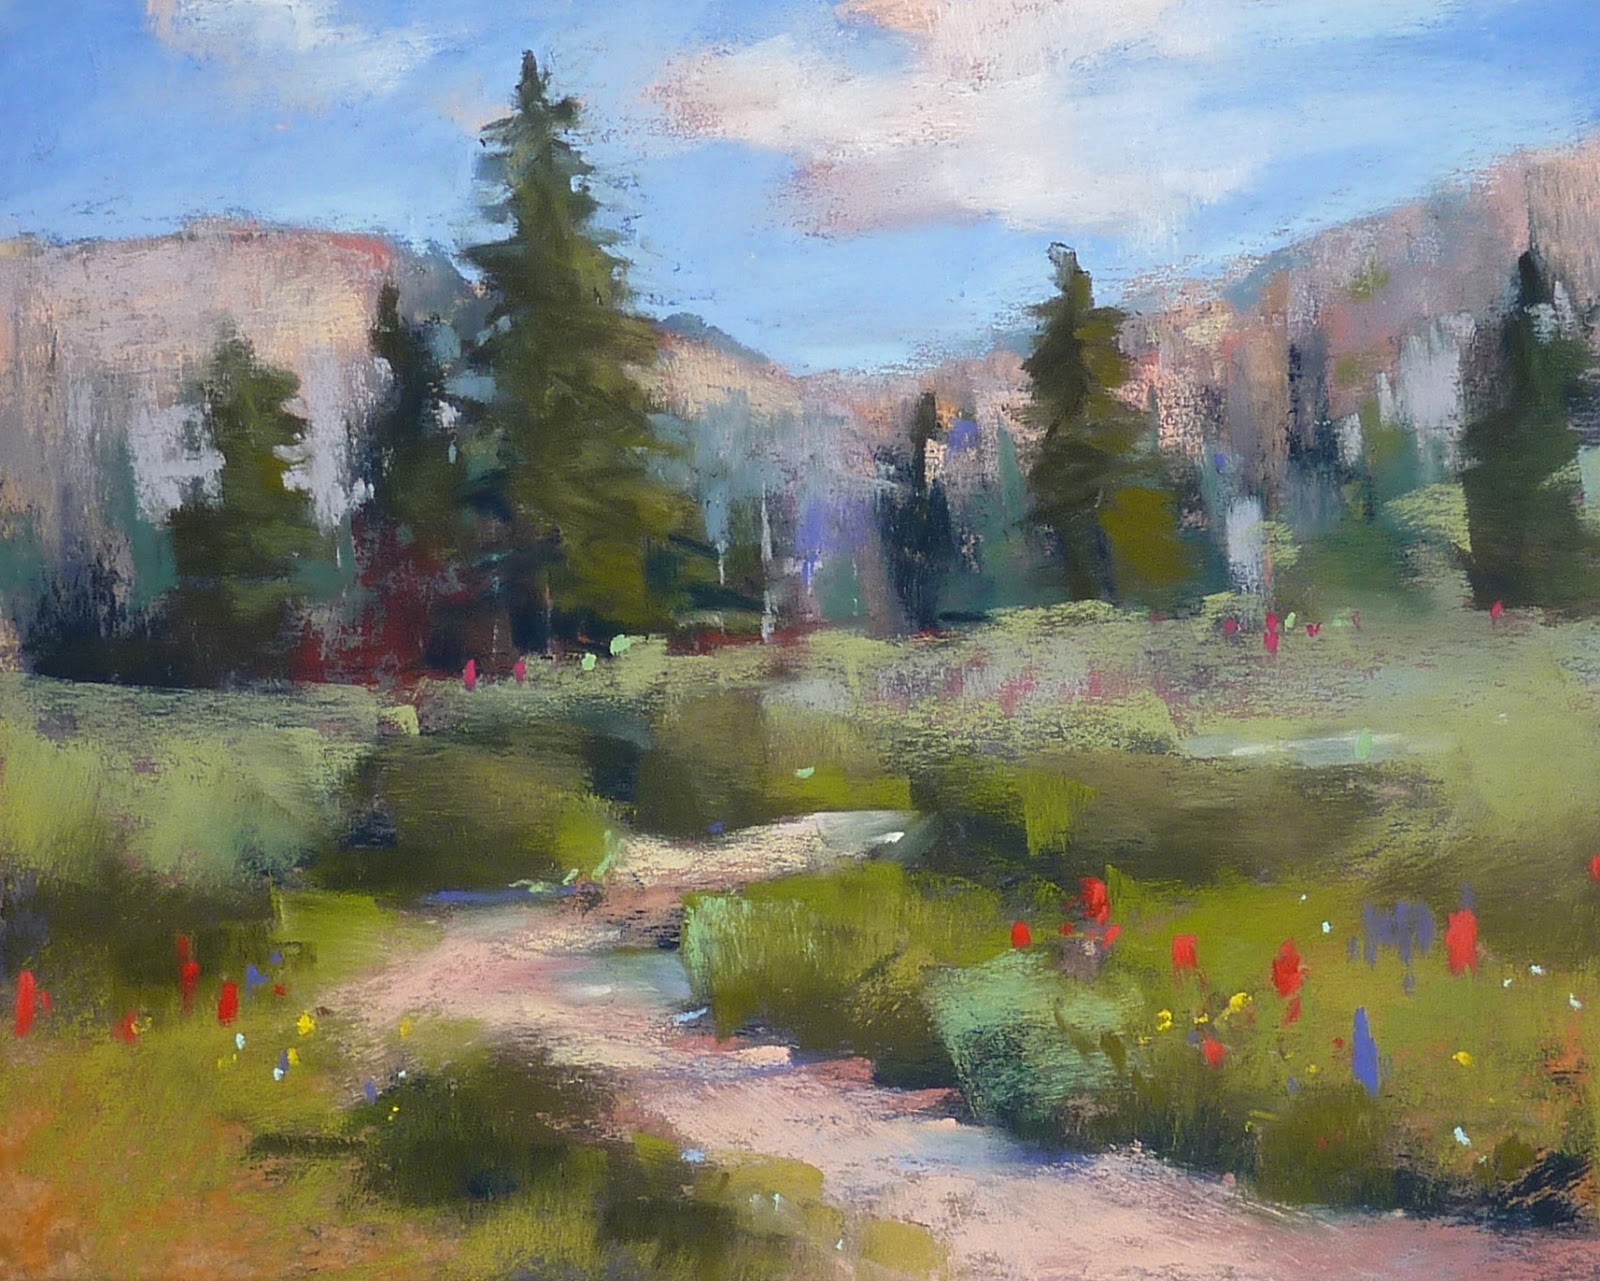 Painting My World: Pastel Demo....Colorado Landscape with Wildflowers